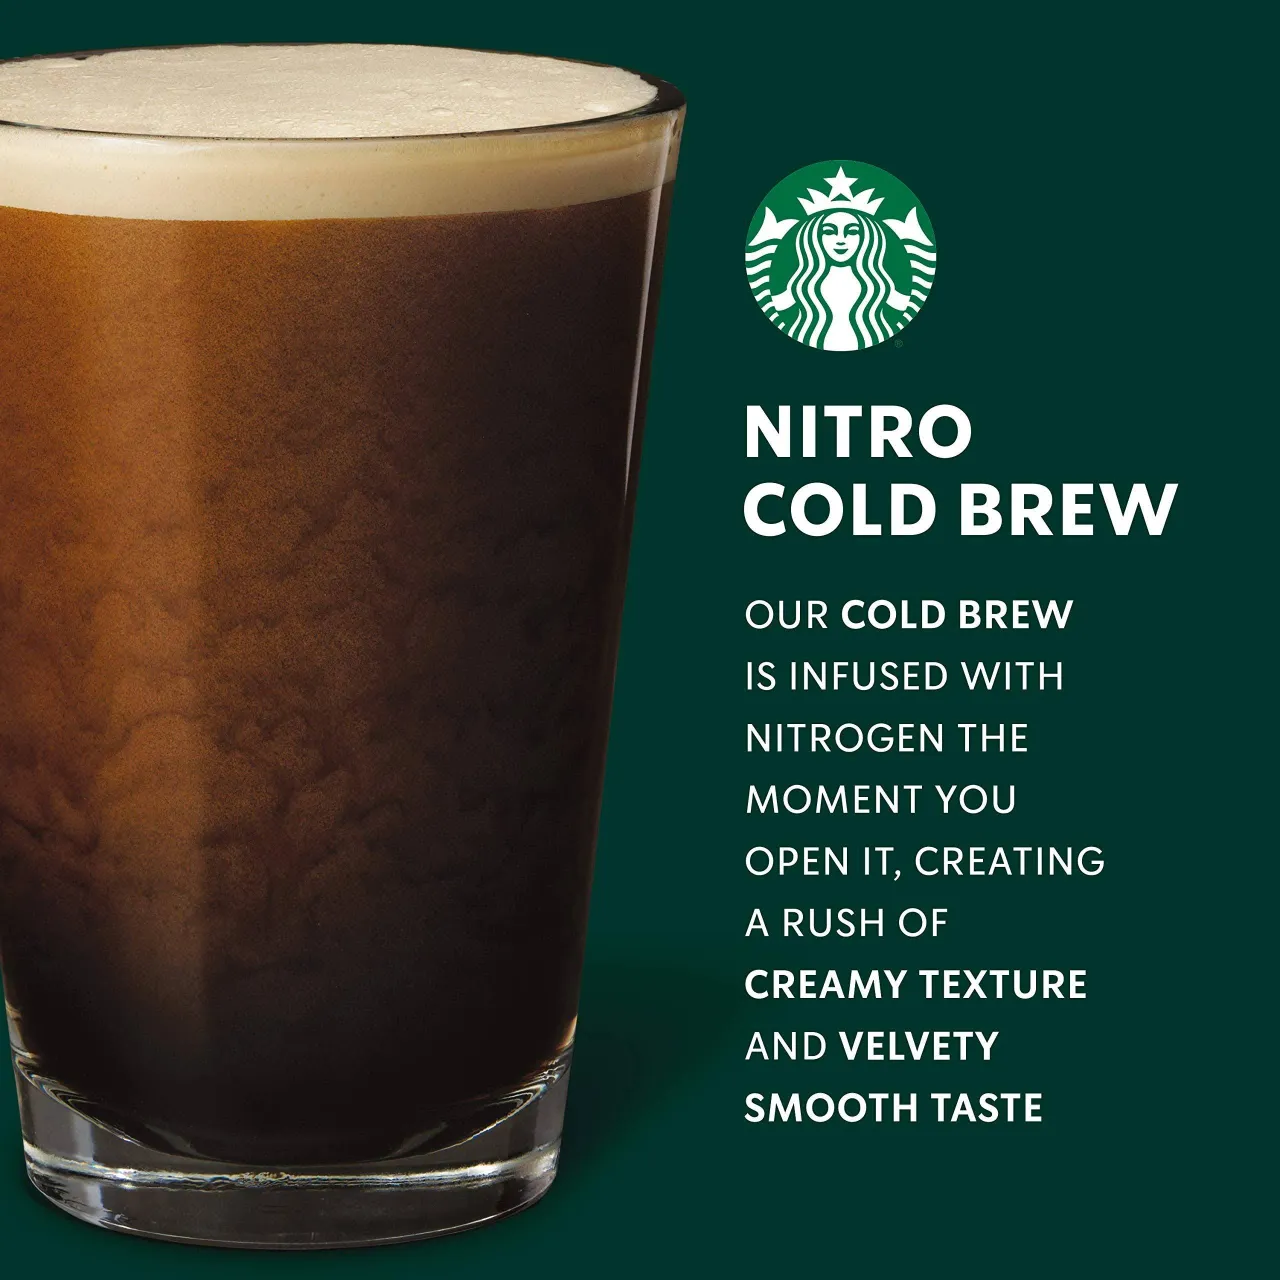 3 Starbucks Nitro Cold Brew, Plain Black, 9.6 fl oz Can (8 Pack) (Packaging Might Be Different)